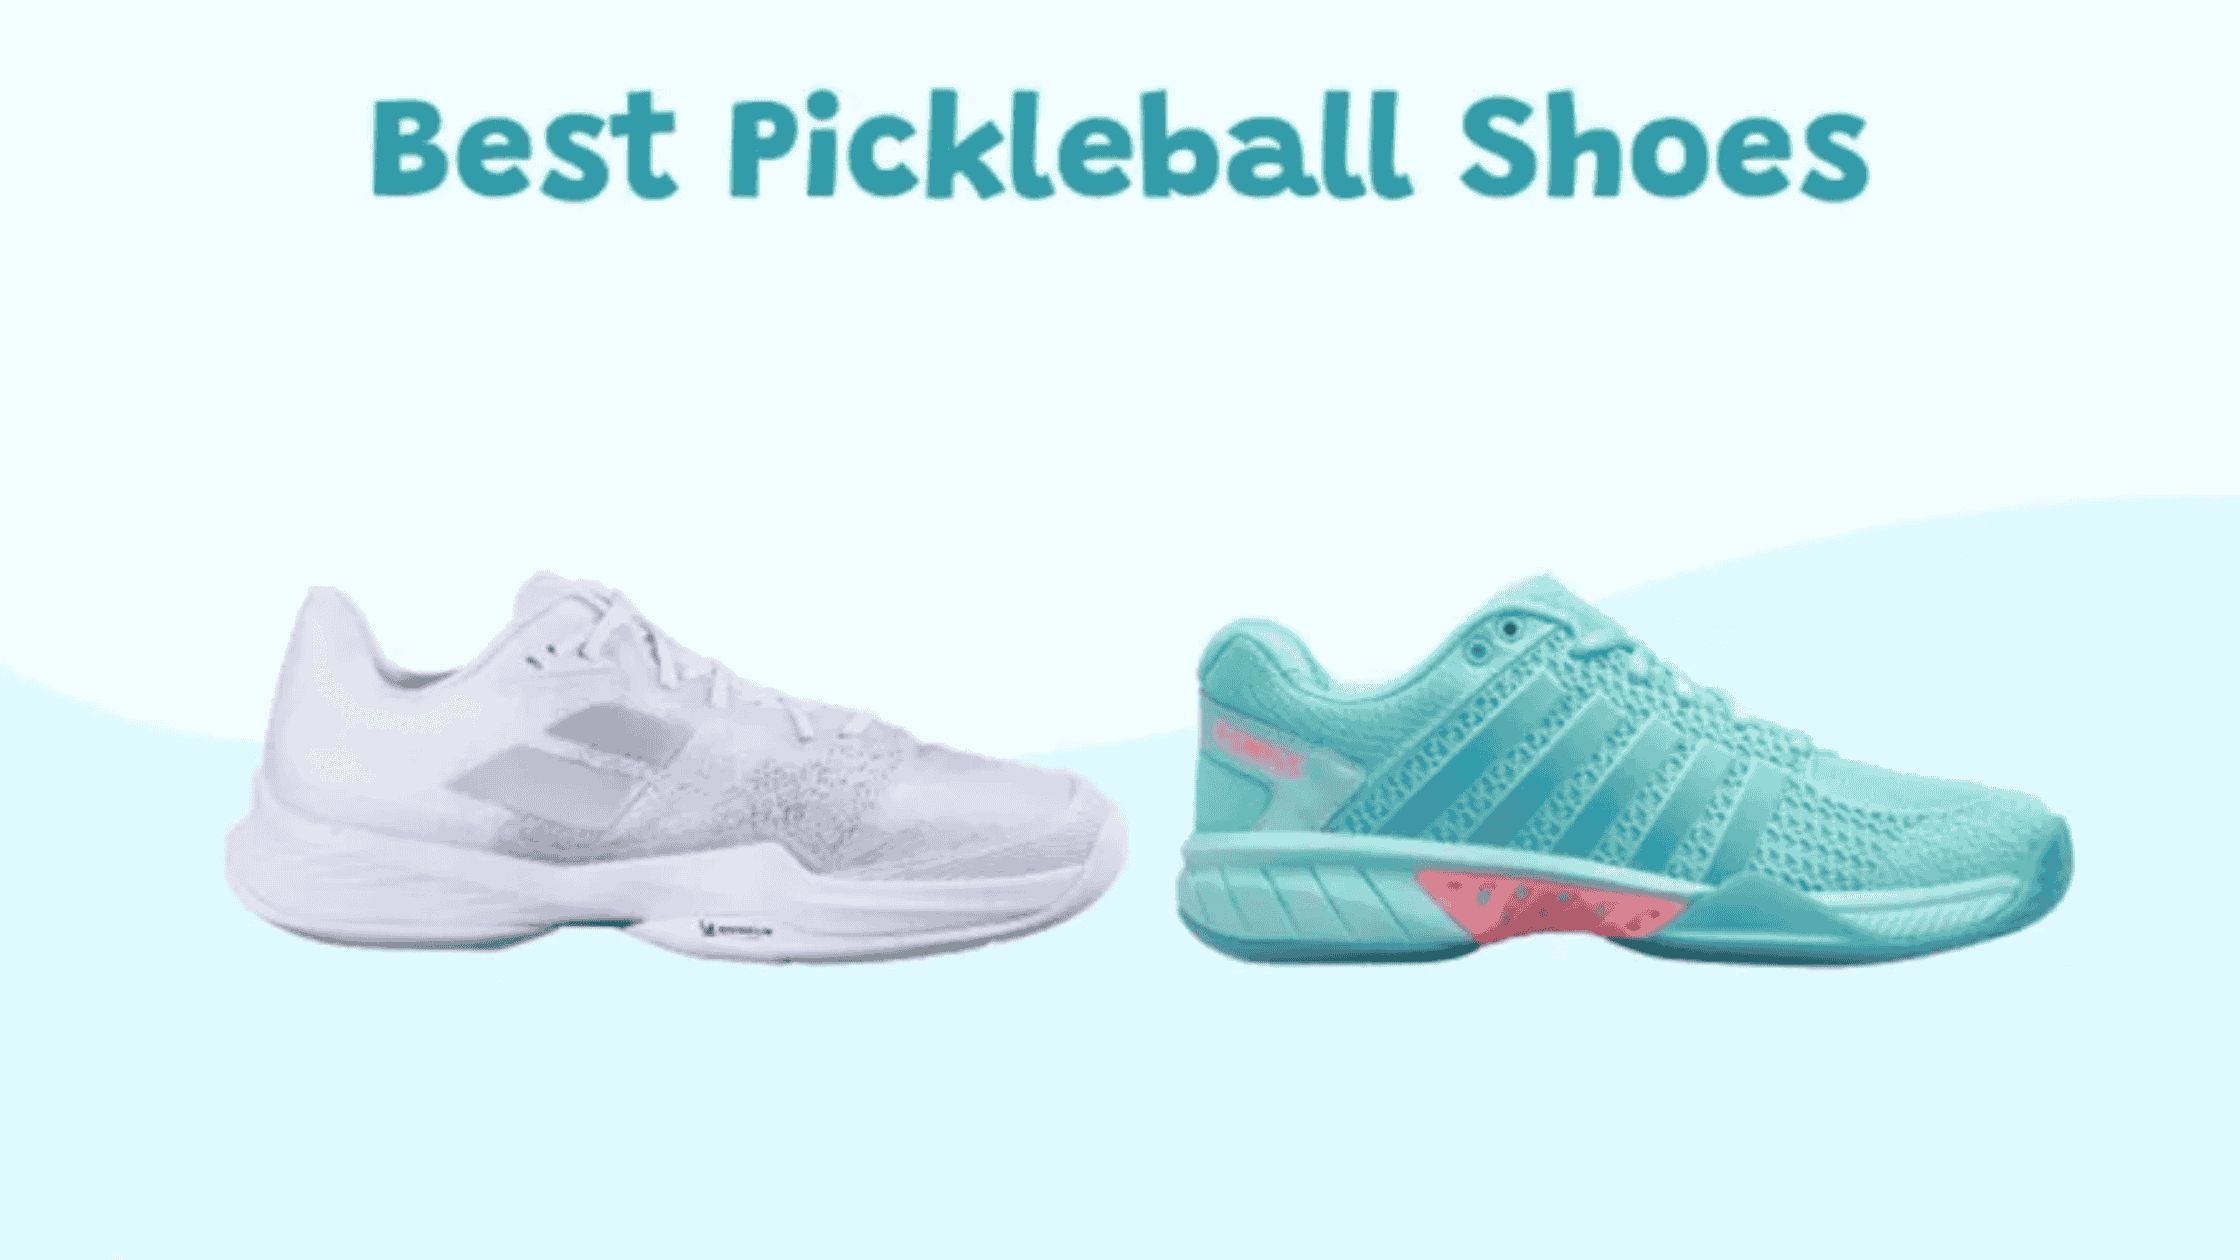 Stability Features in Women's Pickleball Shoes